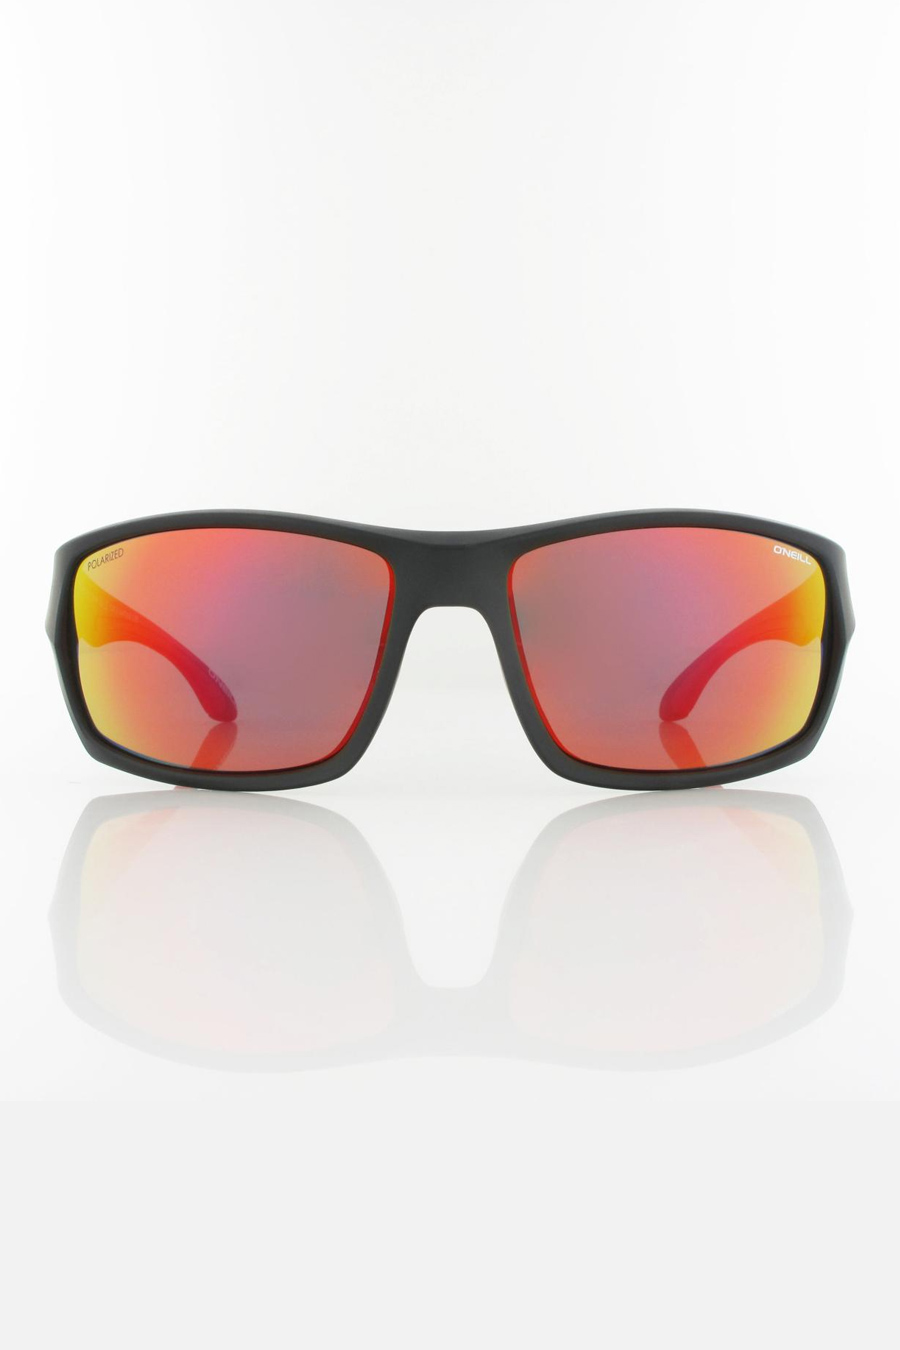 Saulesbrilles ONEILL ONS-9020-20-104P